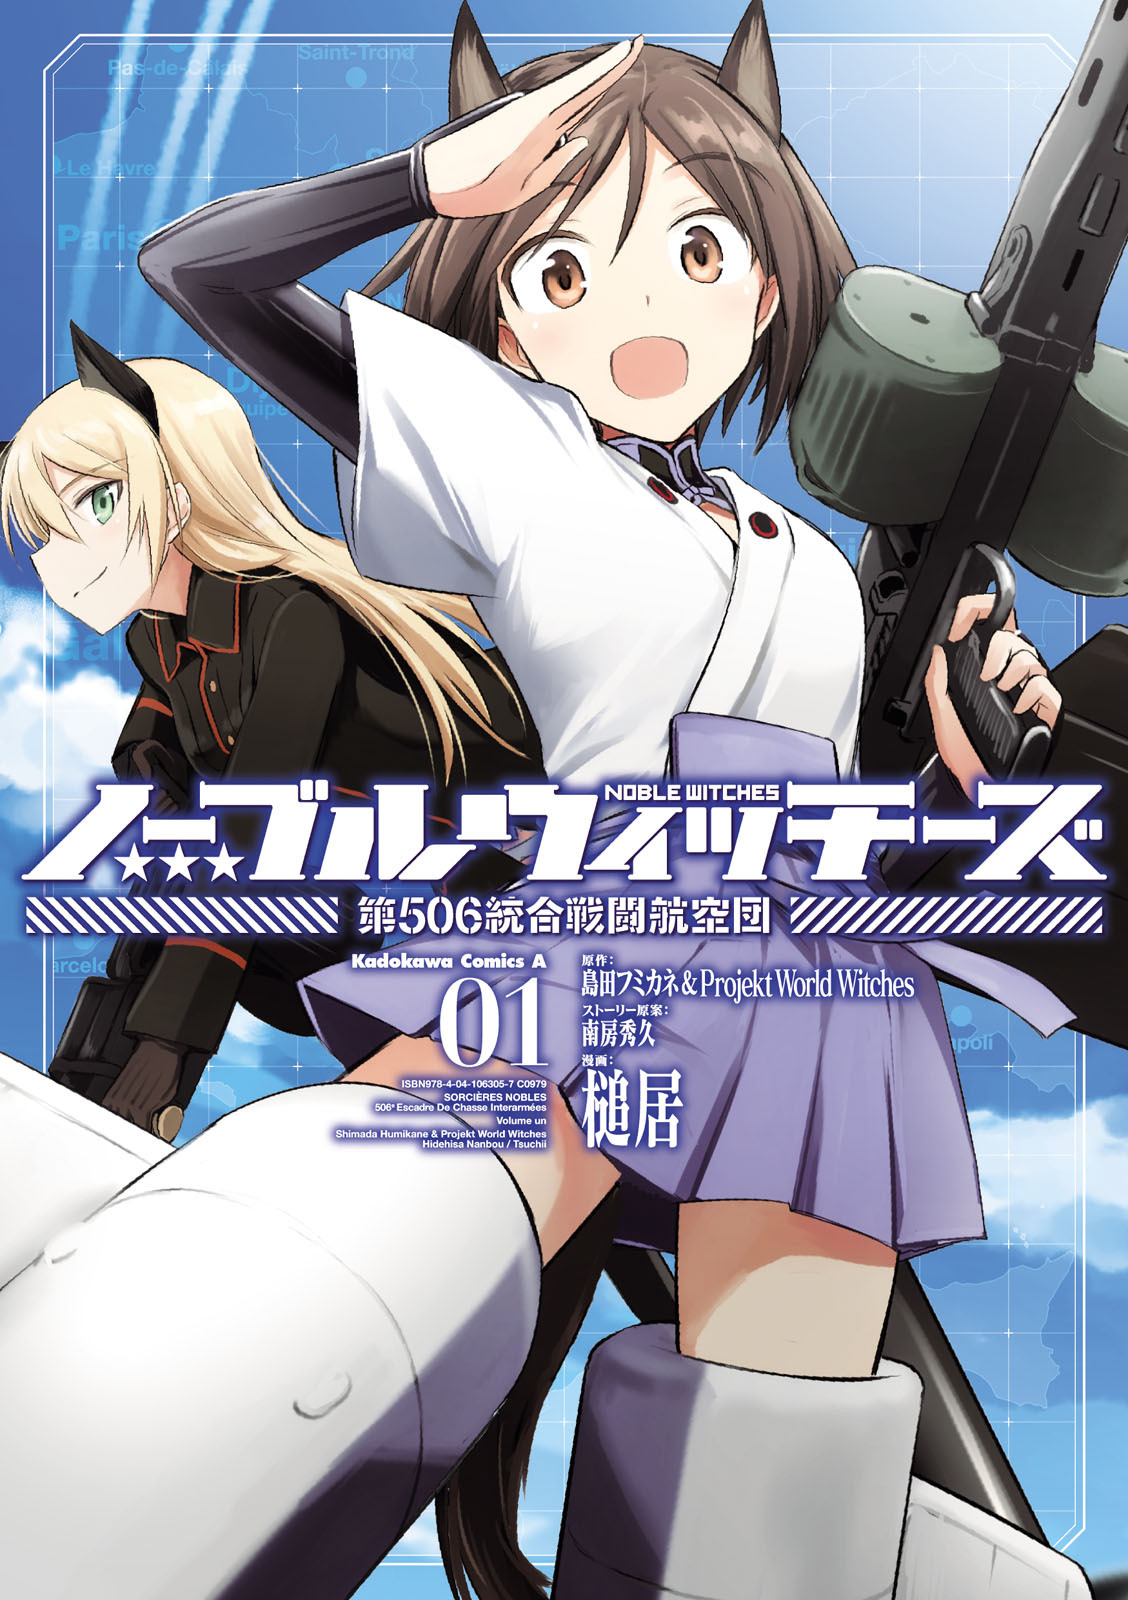 Noble Witches 506th Joint Fighter Wing Vol. 1 Ch. 1